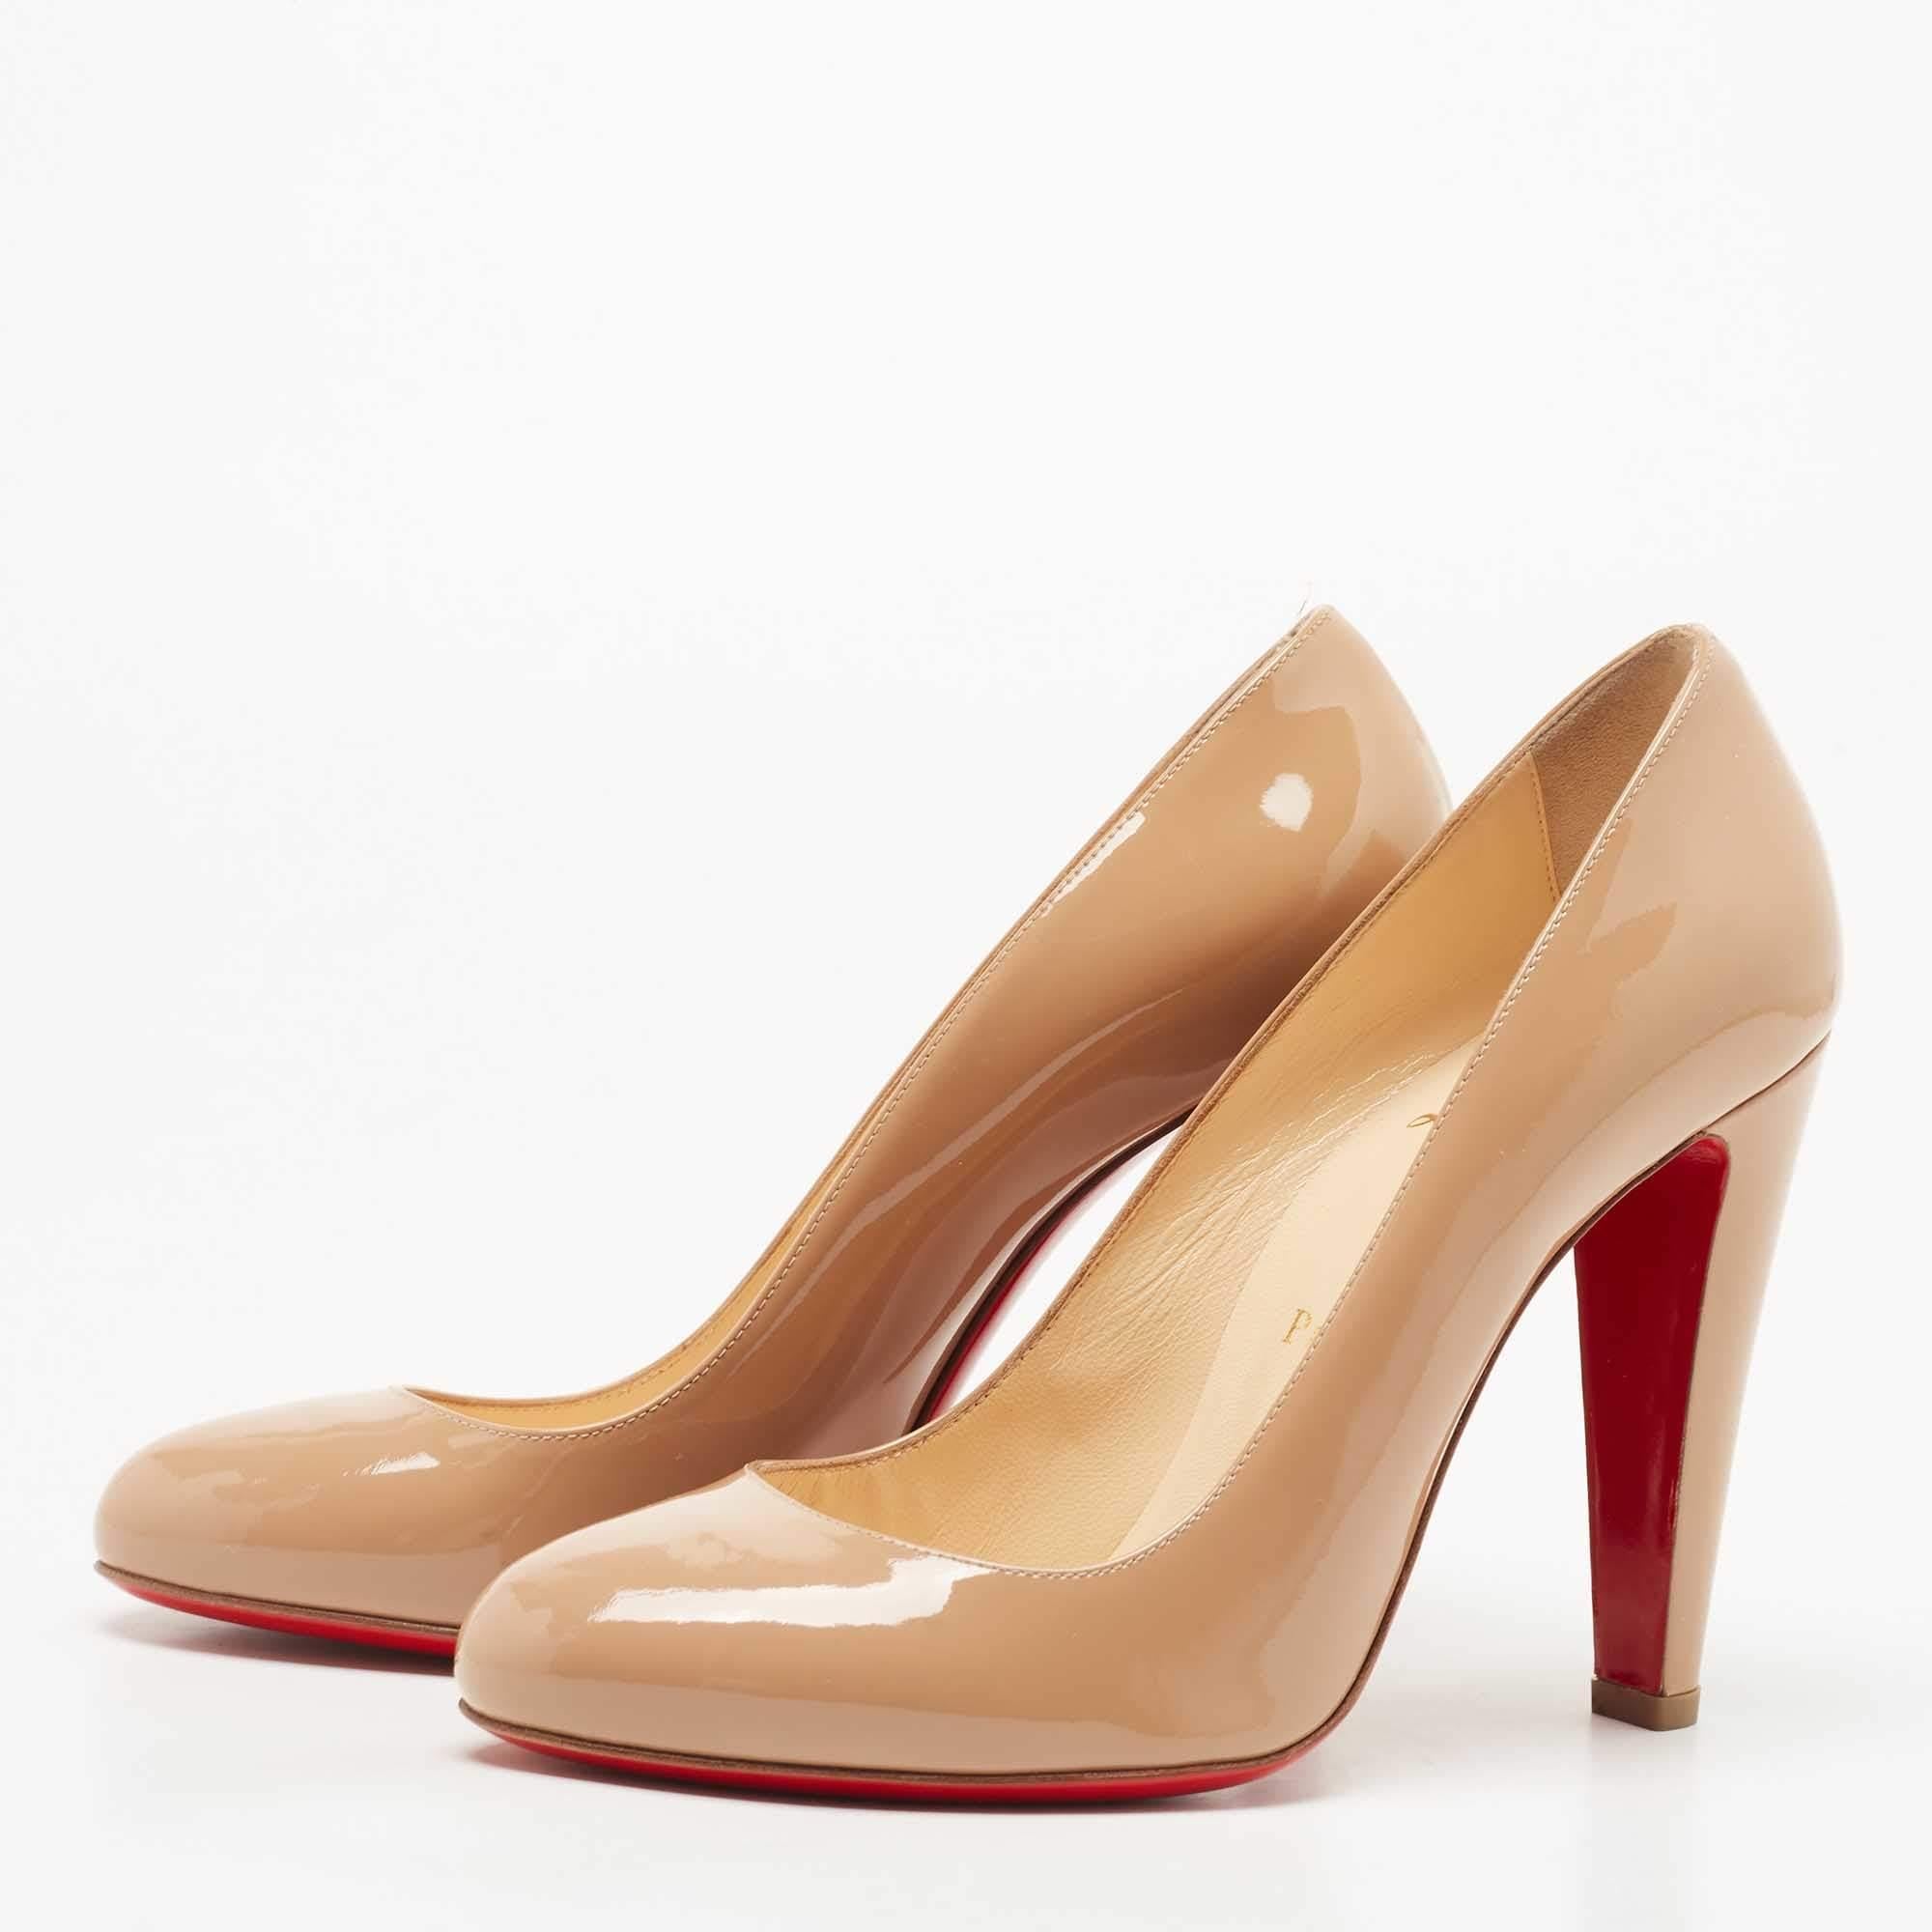 Women's Christian Louboutin Beige Patent Leather FiFifa Round Toe Pumps Size 39